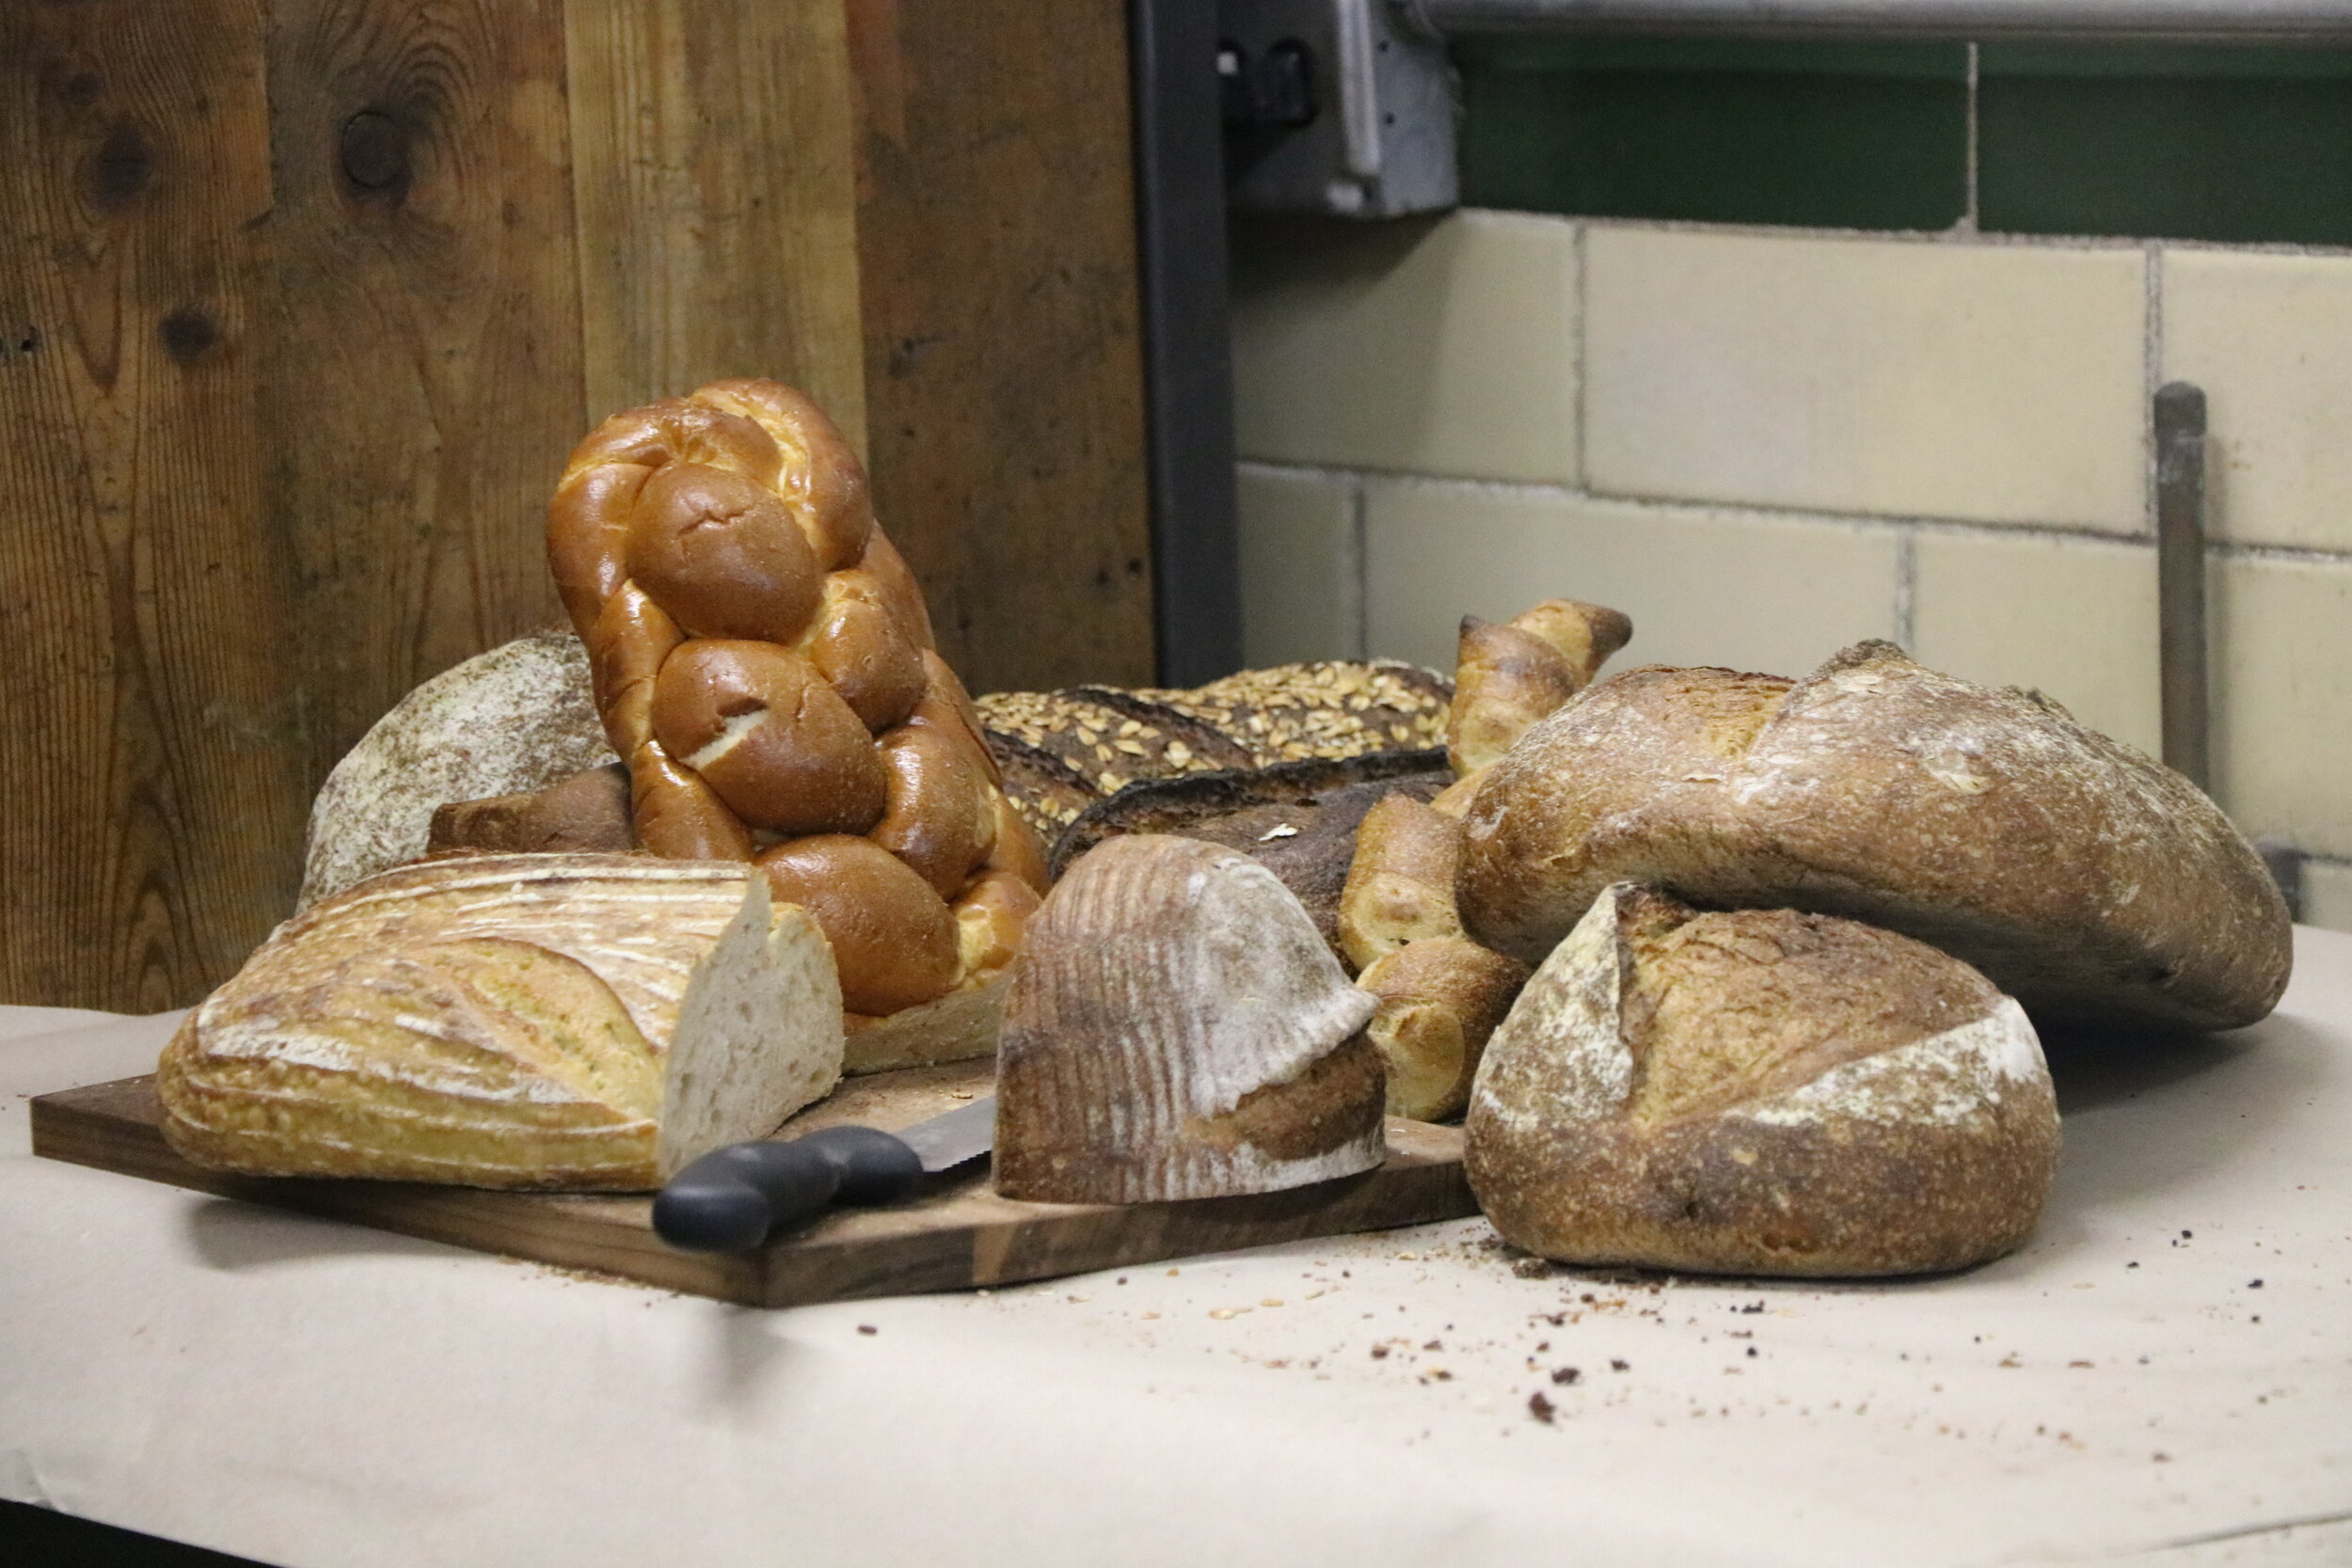  Bread donations from the Chicago Bread Club were a popular food option at Sunday's summit. 